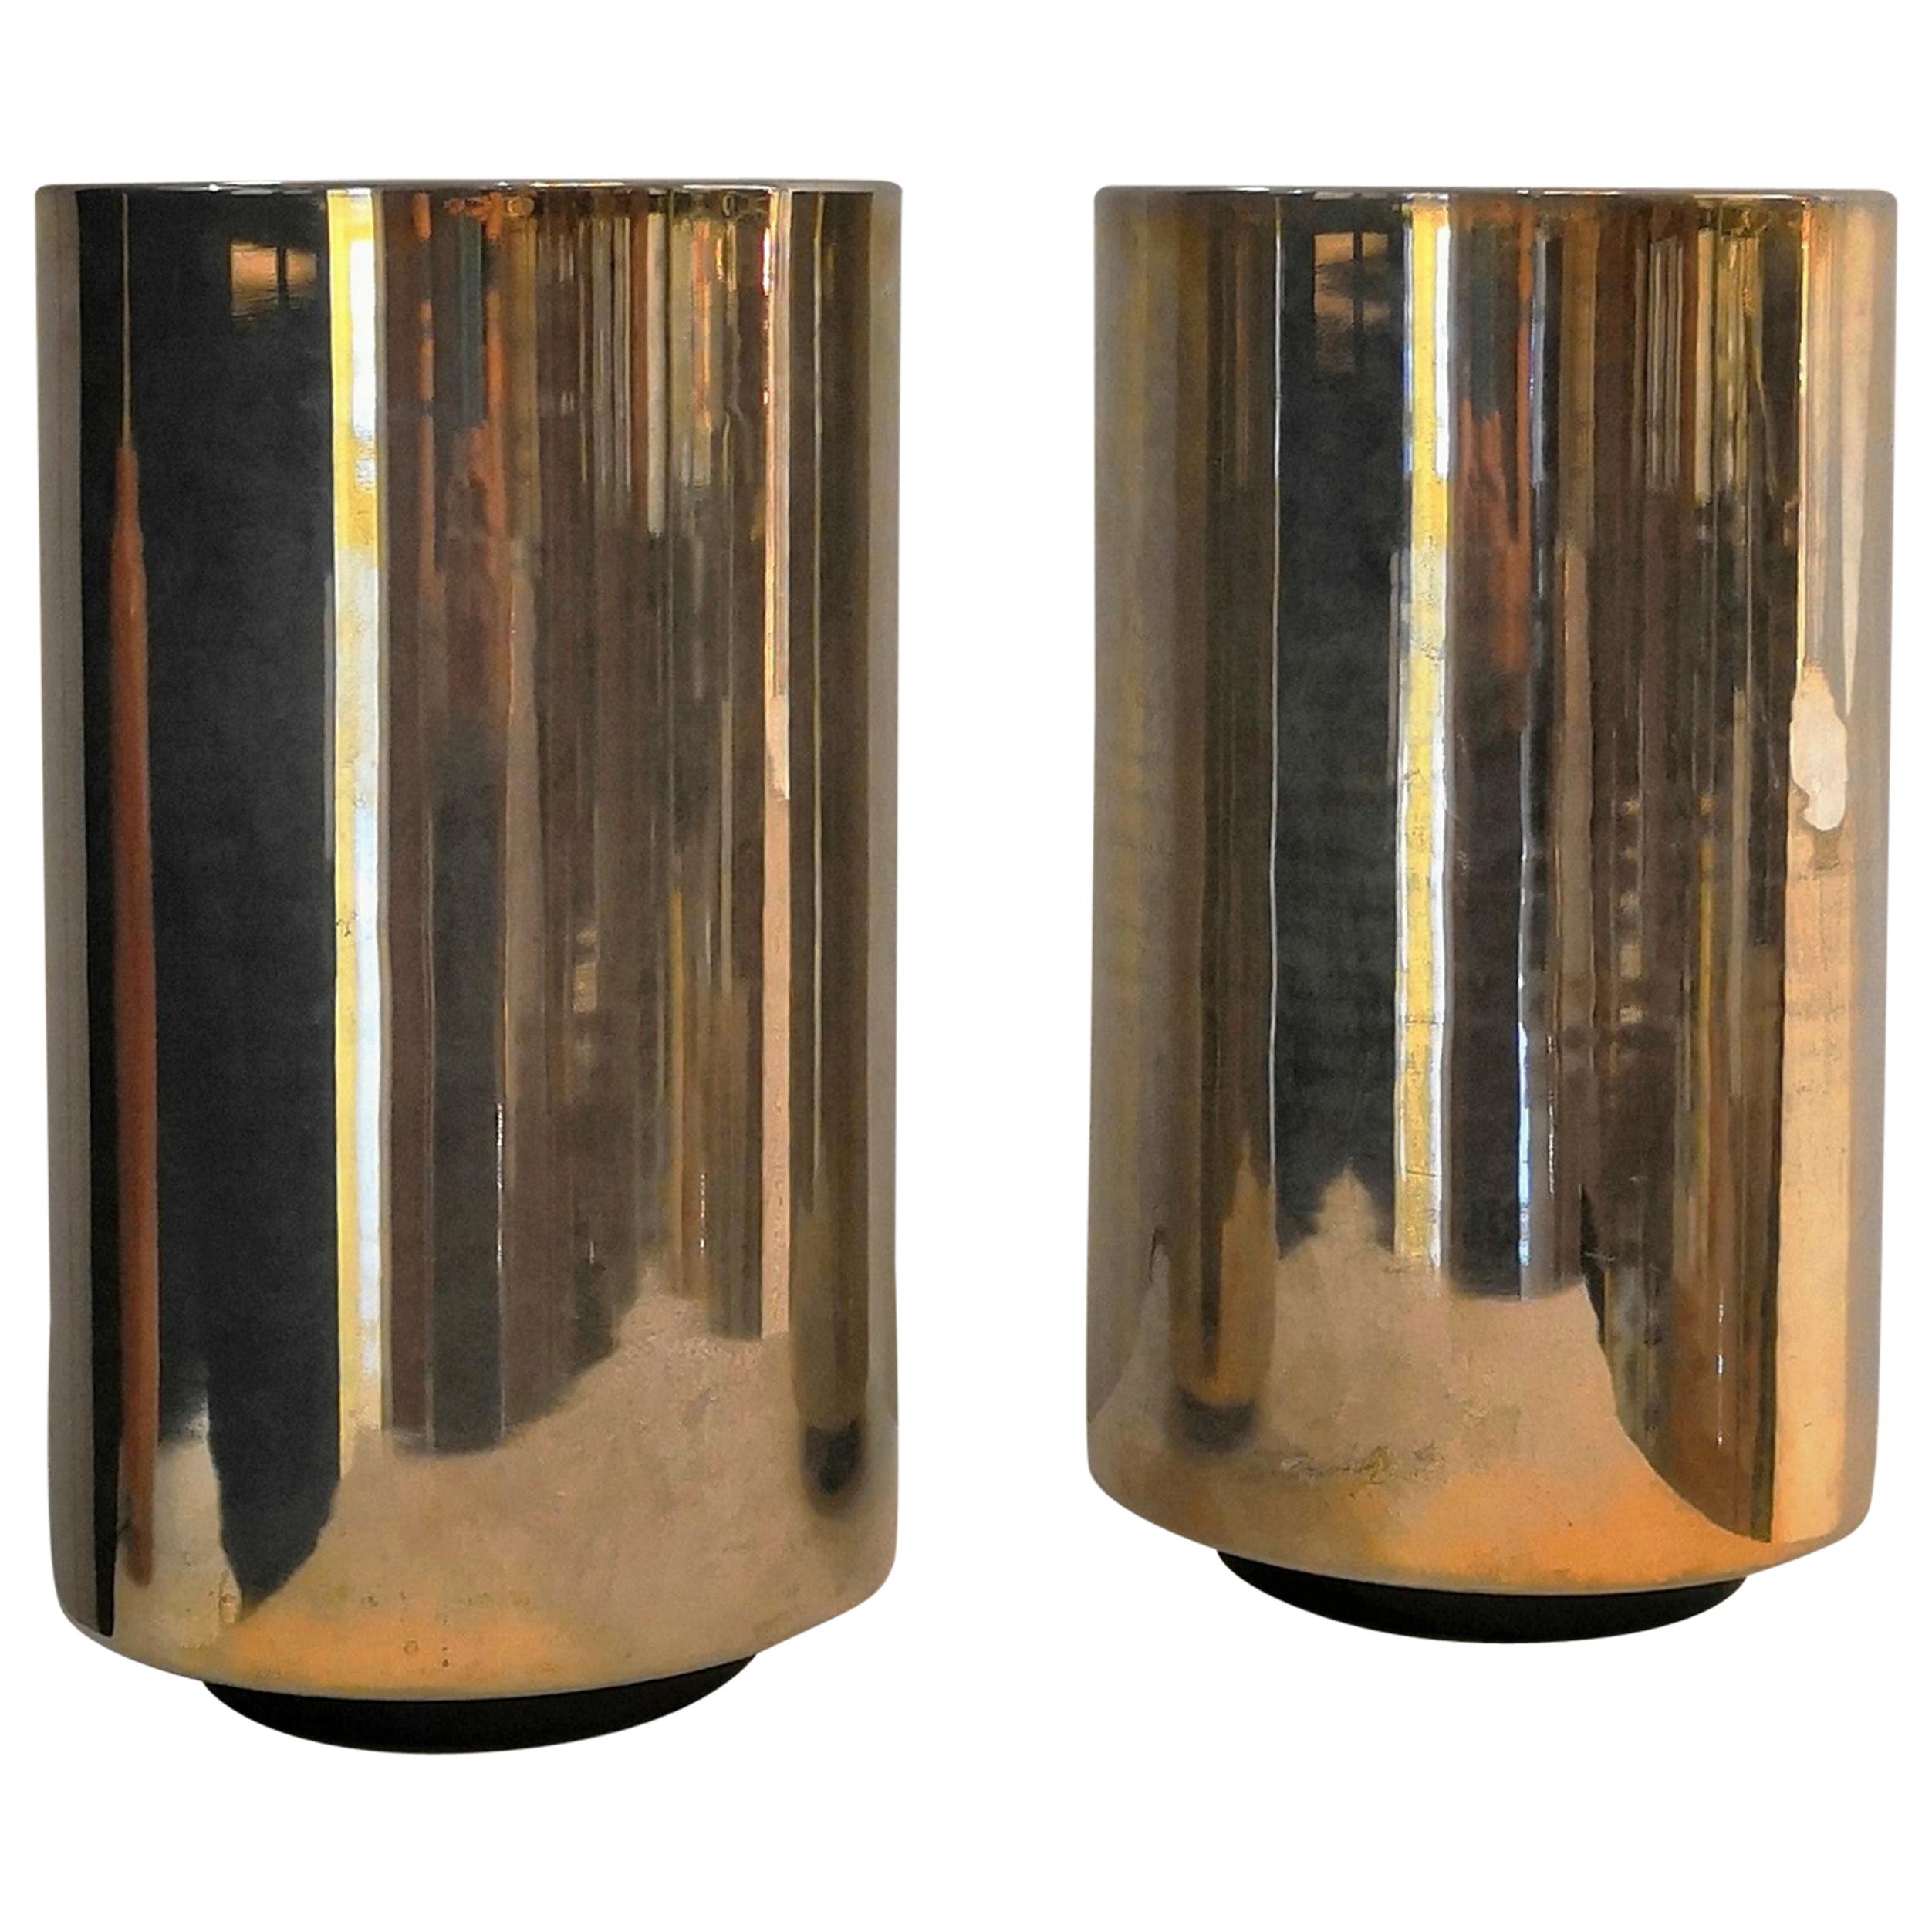 Rarest Pair of Minimalist "Corfou" Lamps by Roger Nathan, France, 1970s For Sale